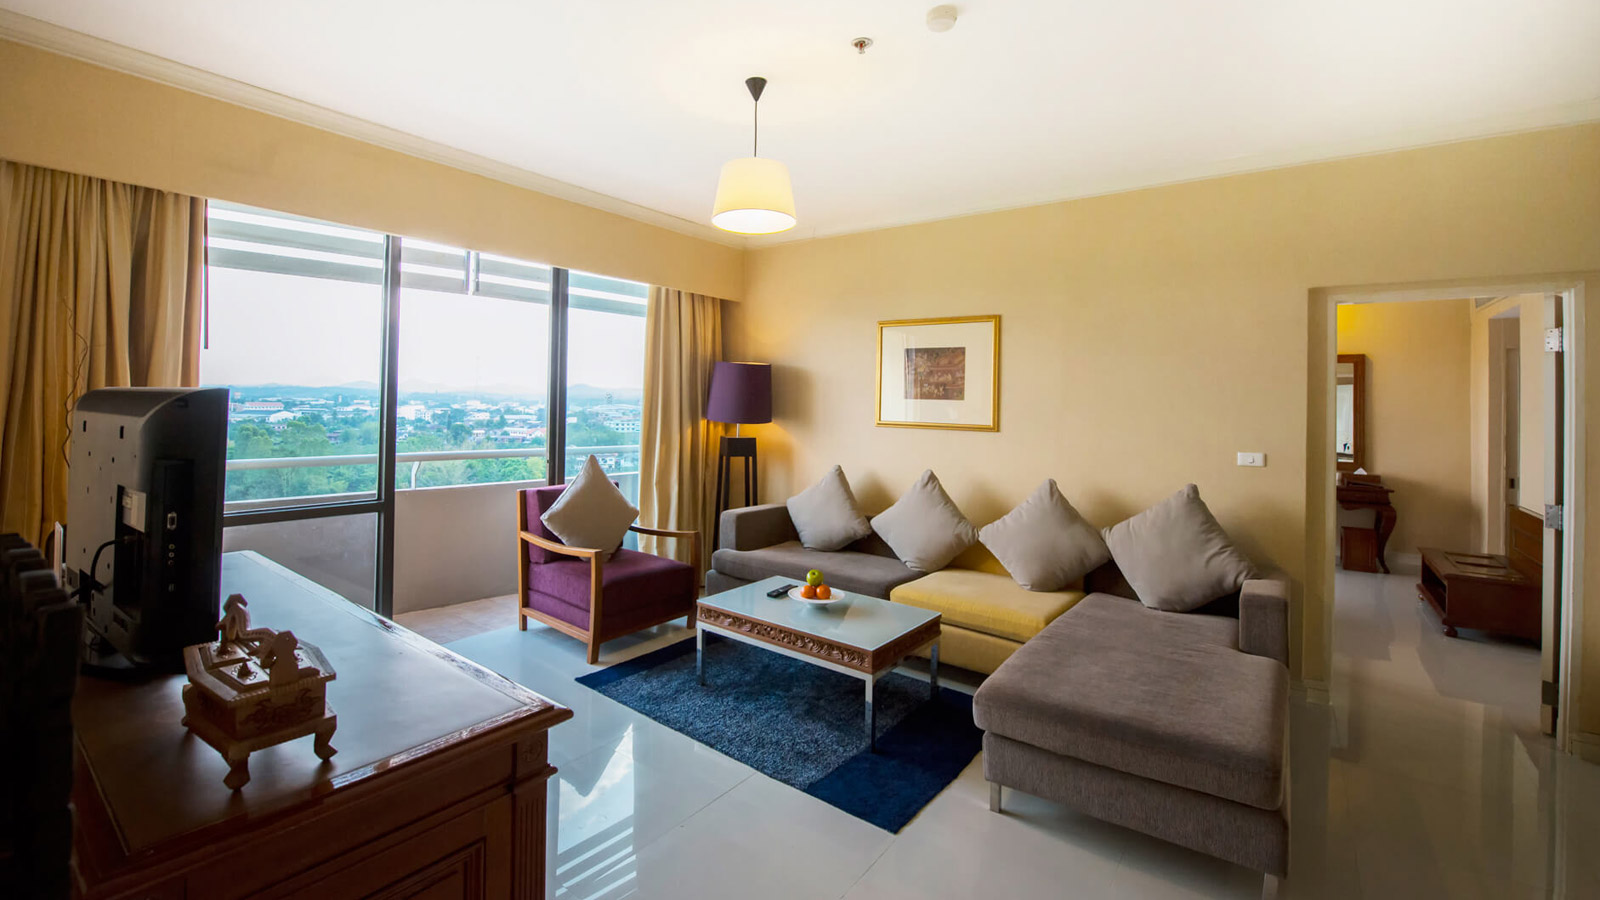 Two Bedroom Suites at Loei Palace Hotel - 黎府宫殿酒店